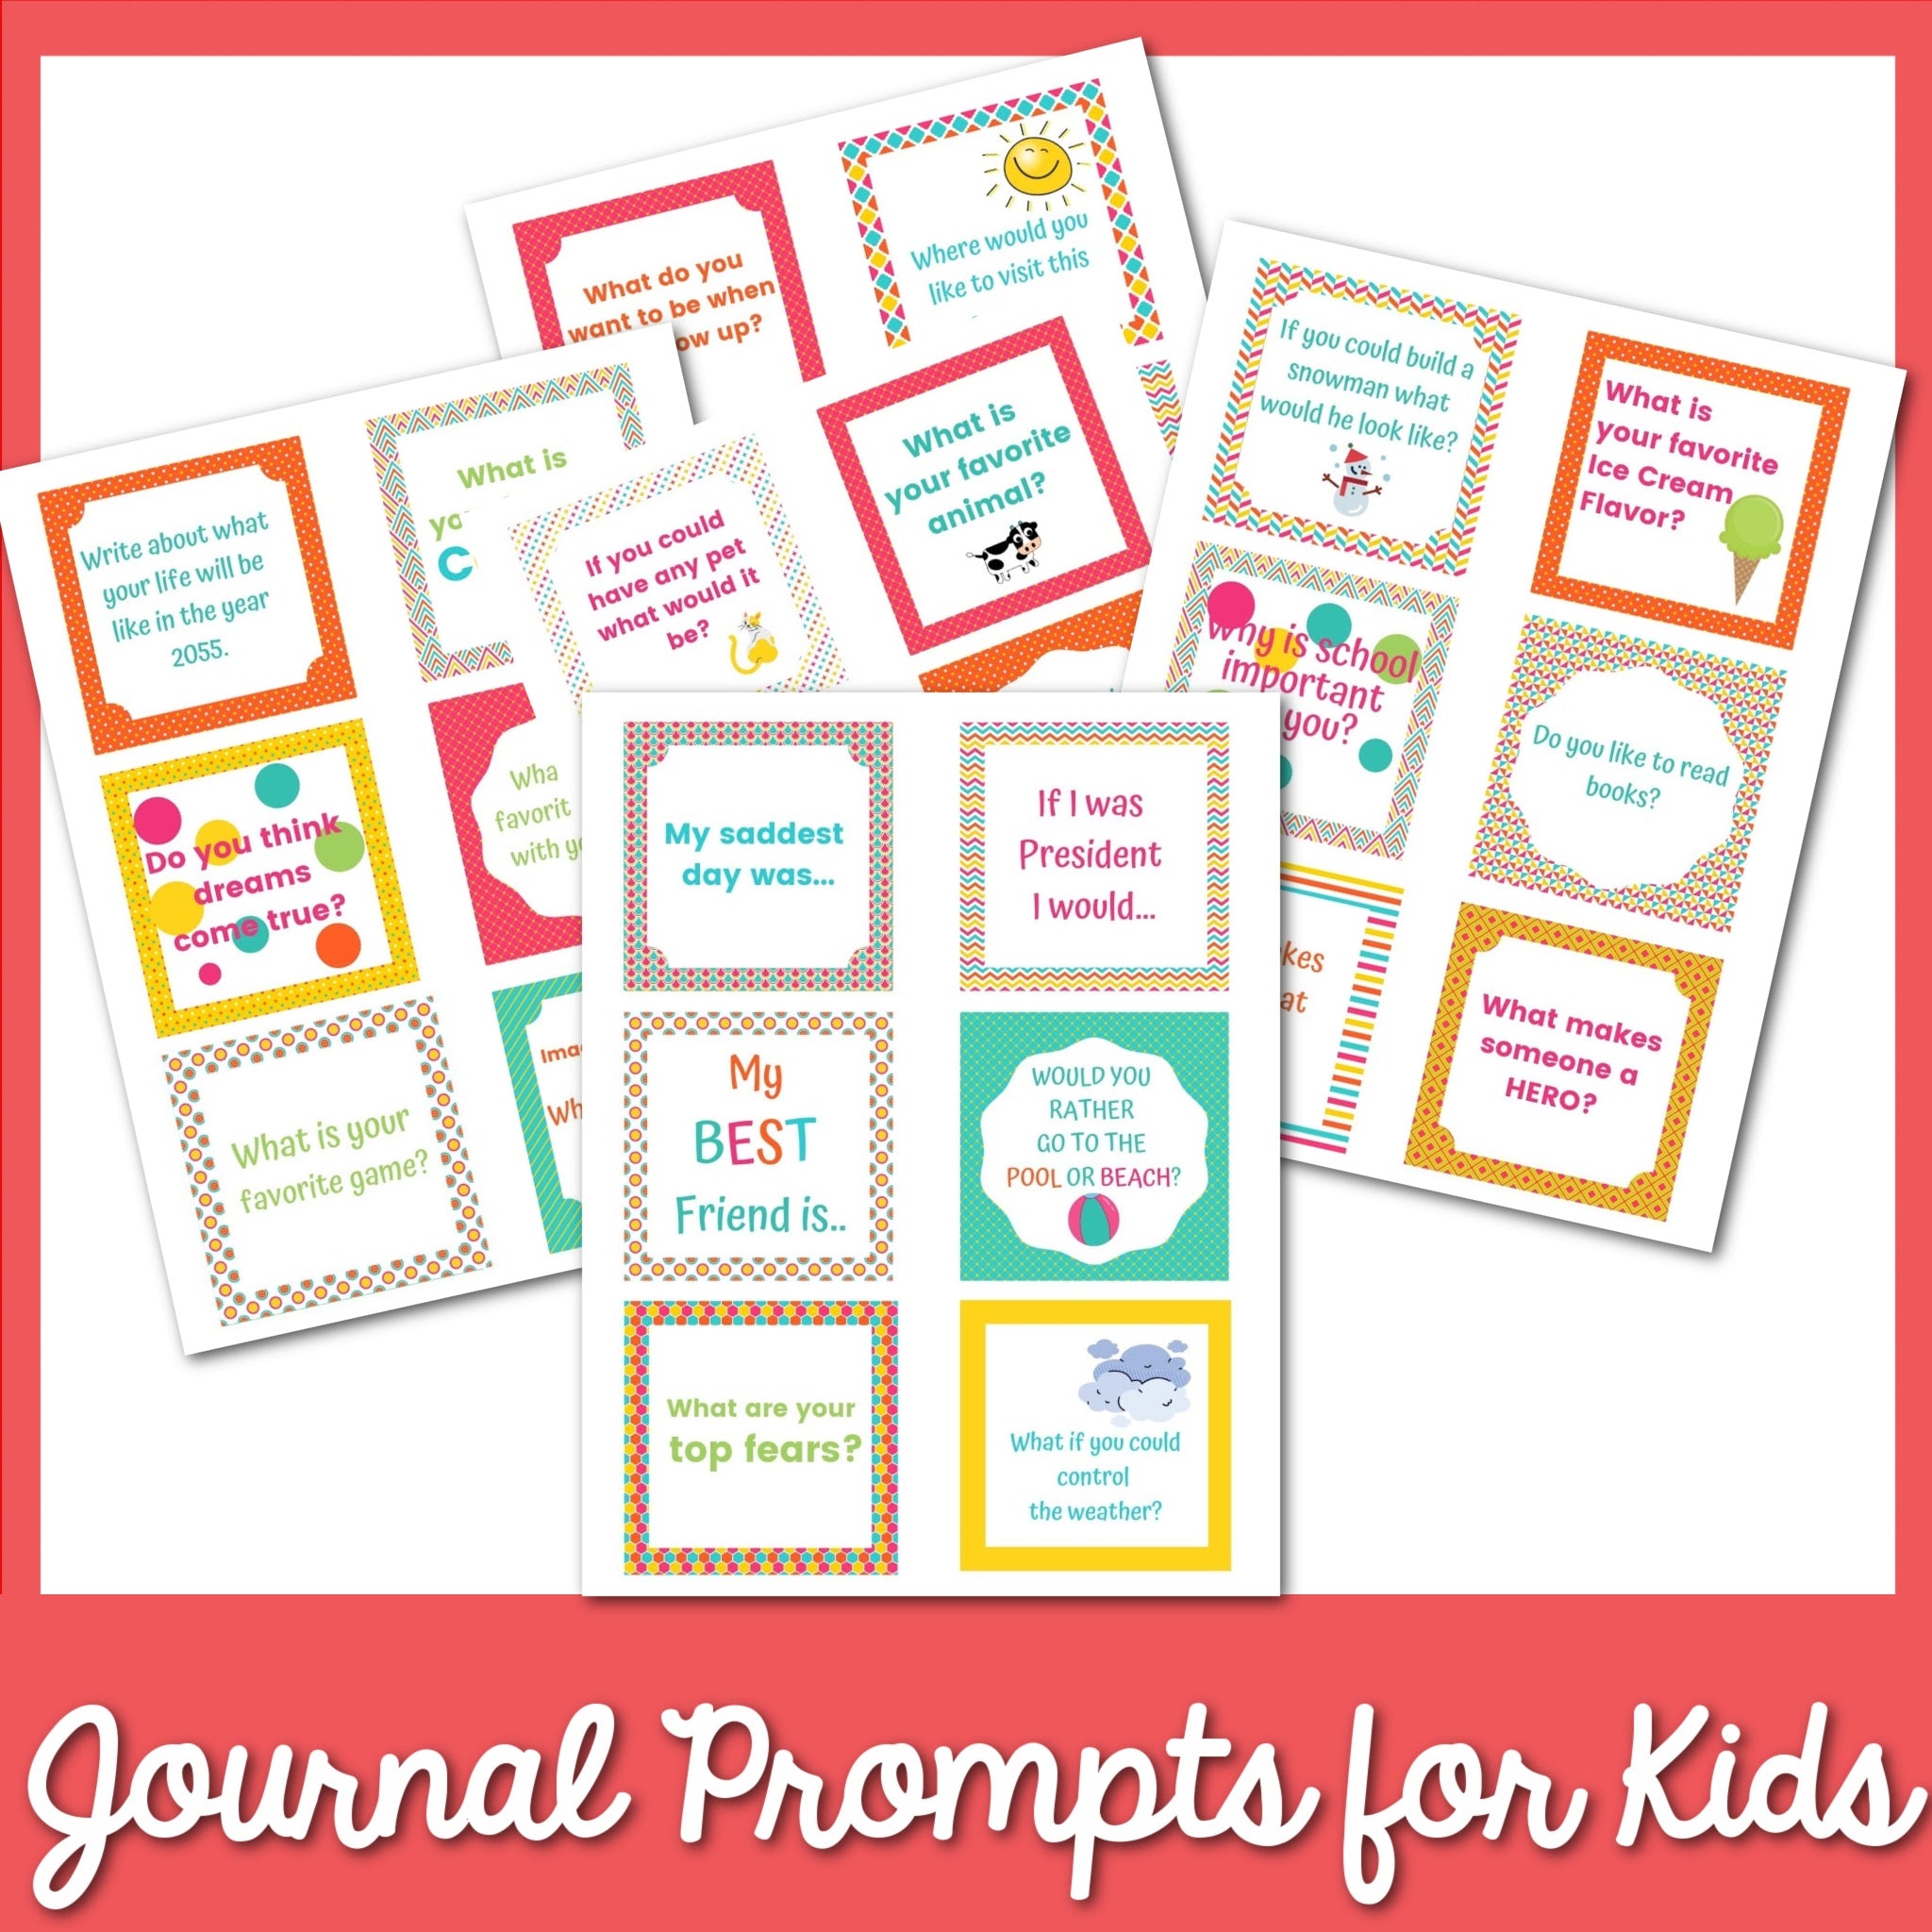 48 Journal Prompts For Kids